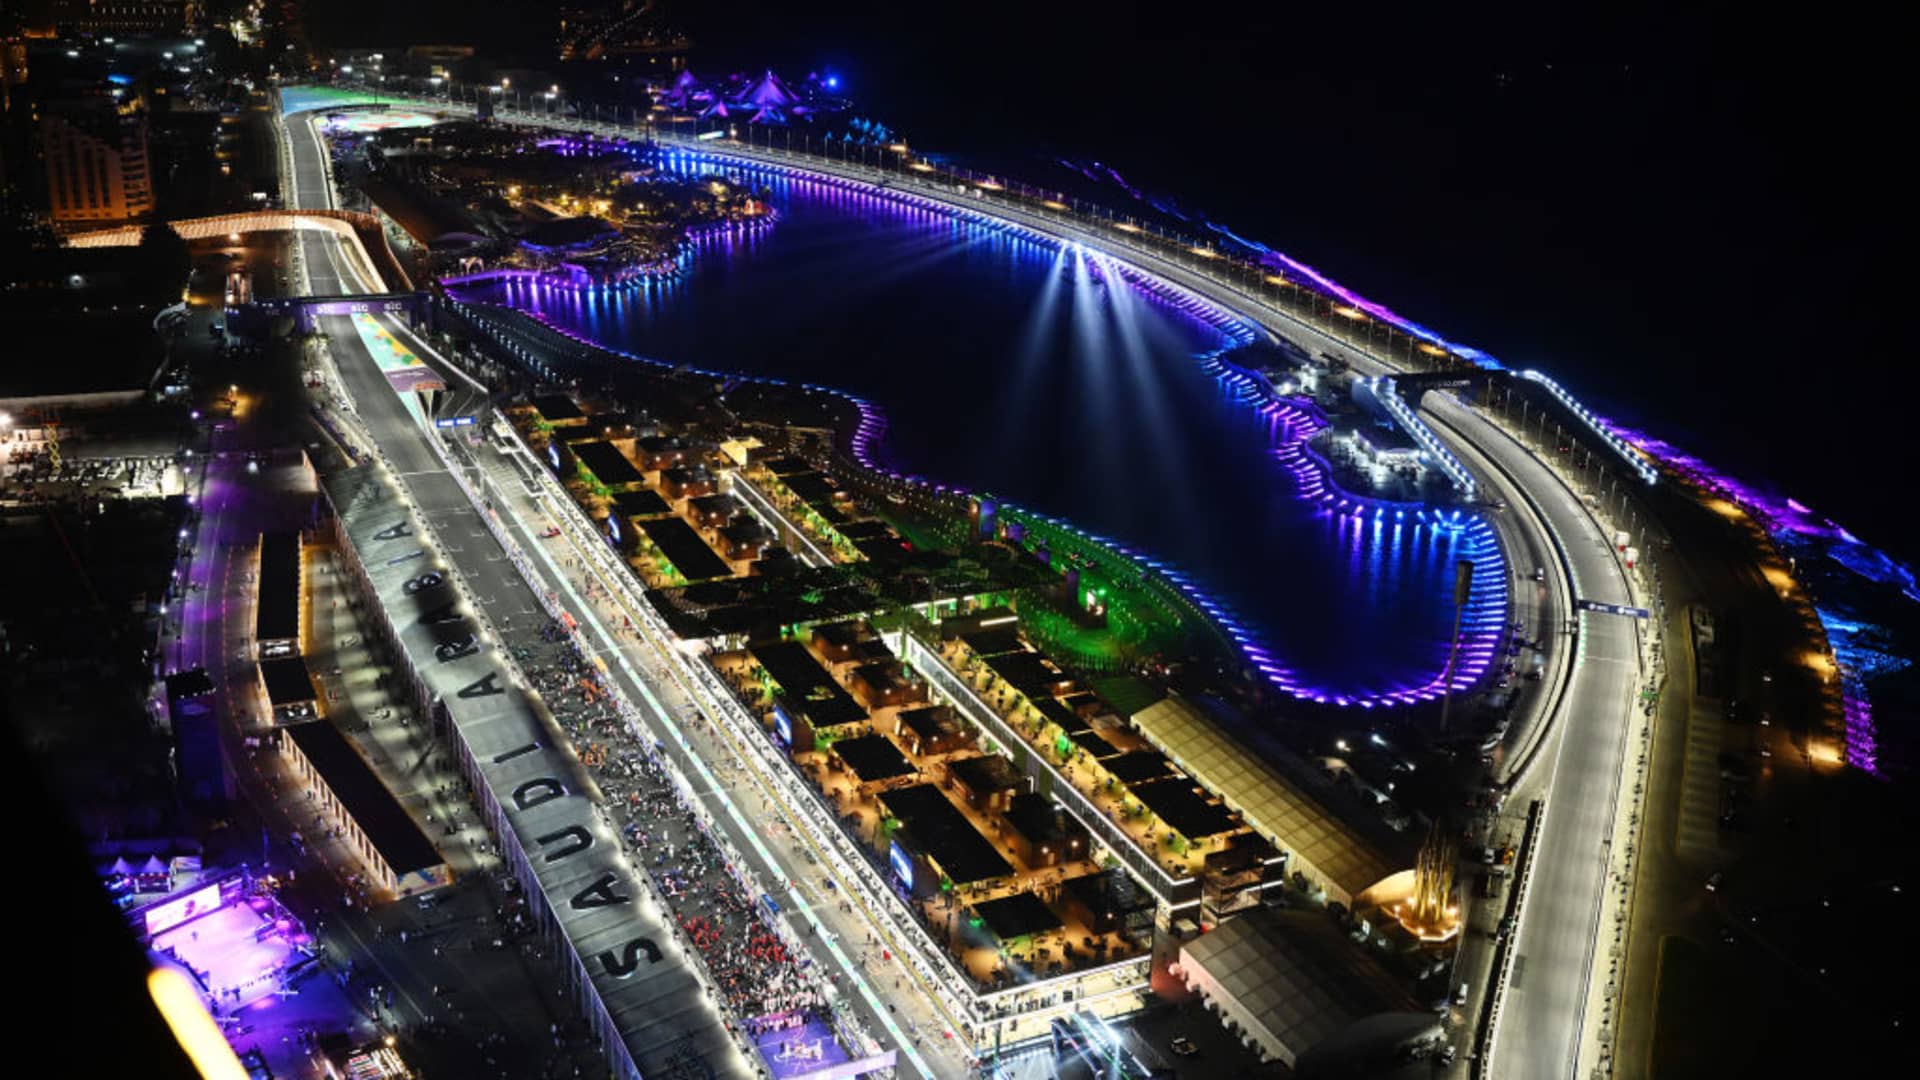 Racing teams prepare on the grid of the Jeddah Corniche Circuit for the F1 Grand Prix of Saudi Arabia. A missile attack ahead of the race raised fresh doubts about how host decisions are made.